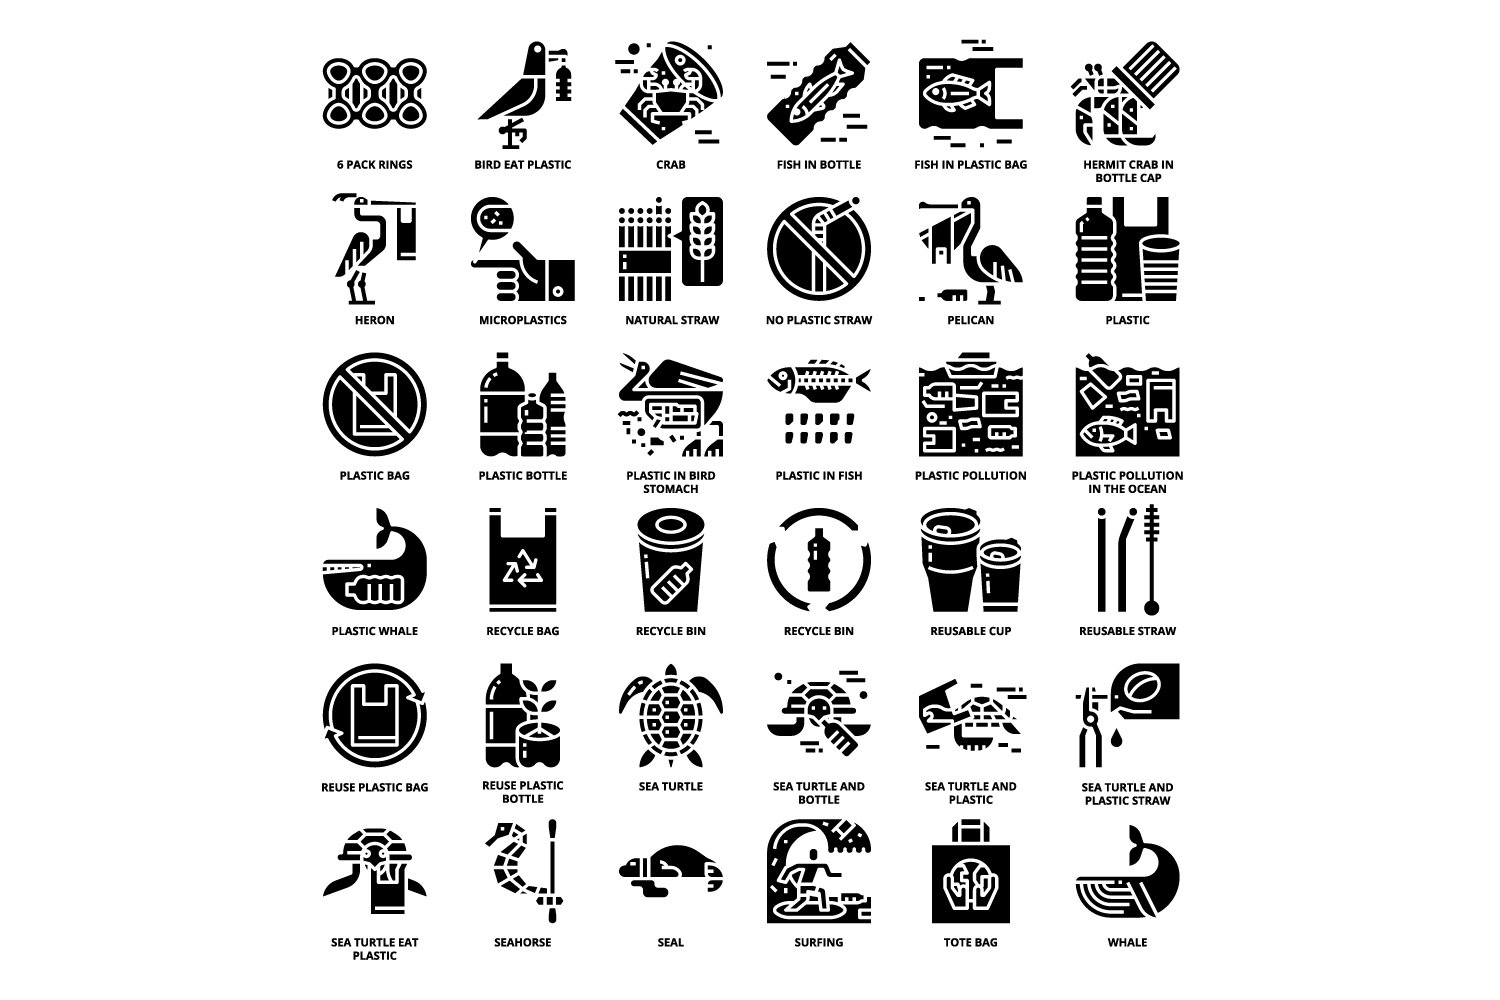 Black and white image of various symbols.